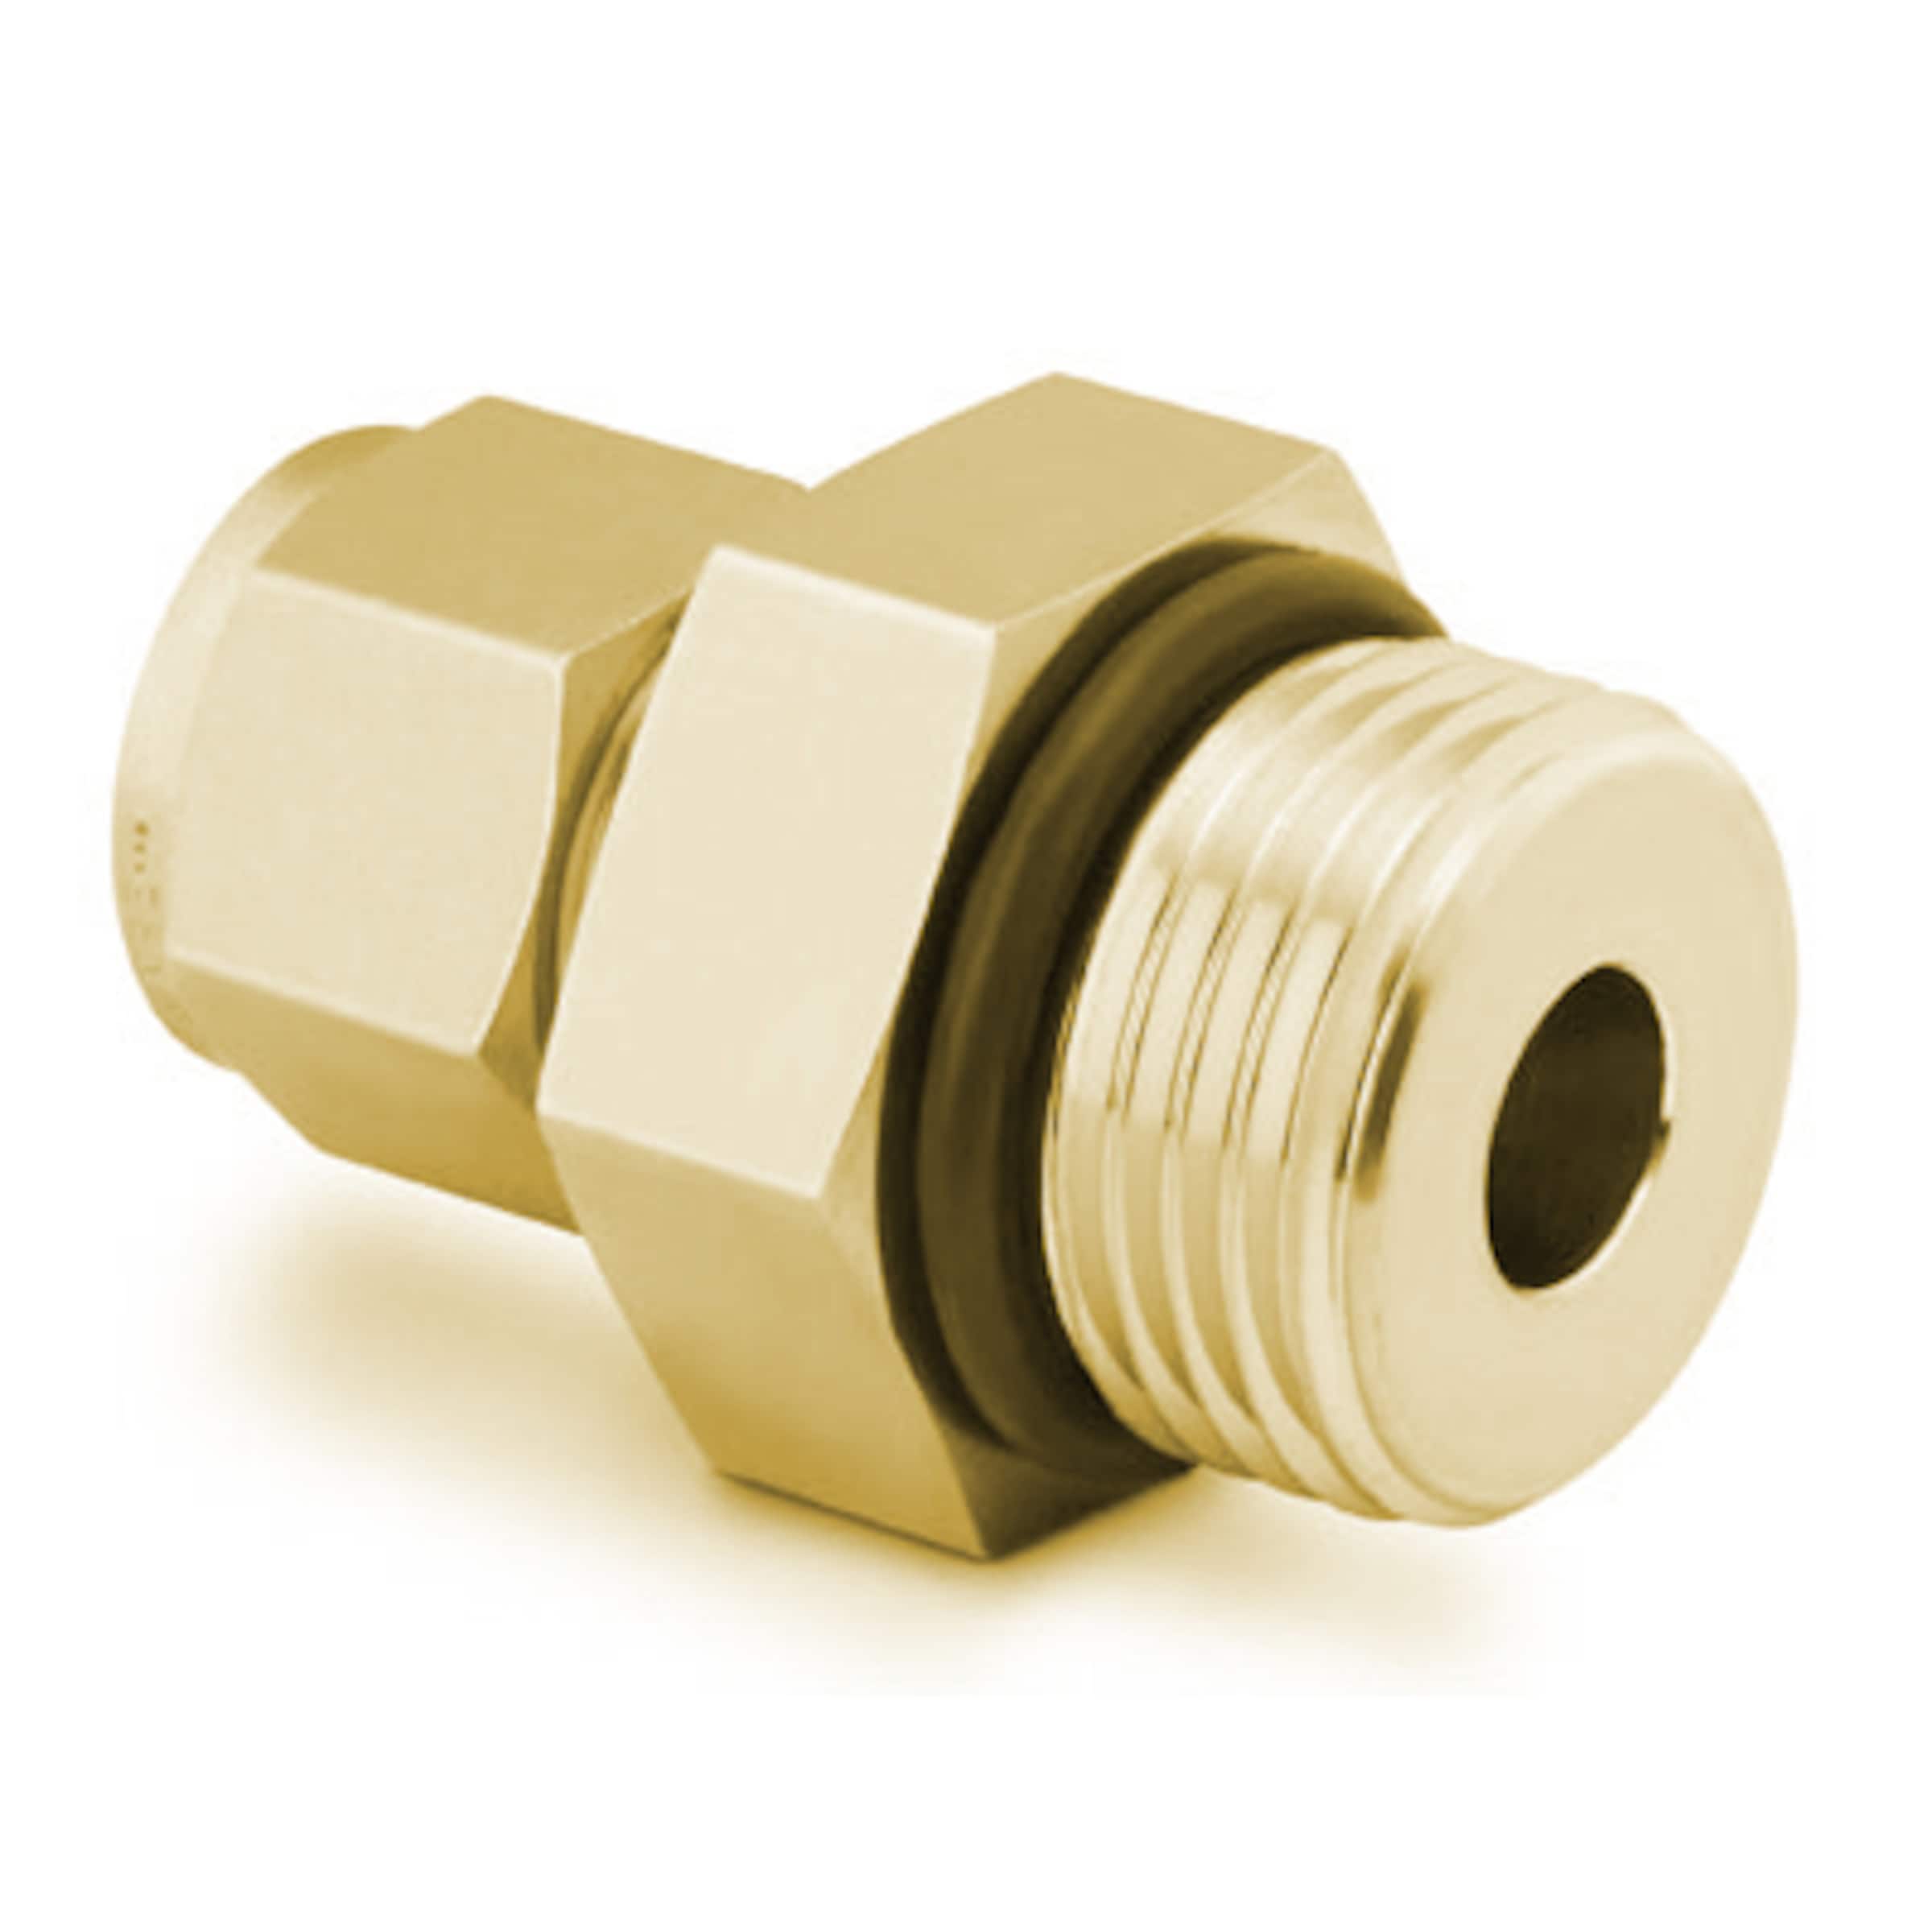 Brass Swagelok Tube Fitting, Male Connector, 1/4 in. Tube OD x 7/16-20 Male  SAE/MS Straight Thread, Male Connectors, Tube Fittings and Adapters, Fittings, All Products